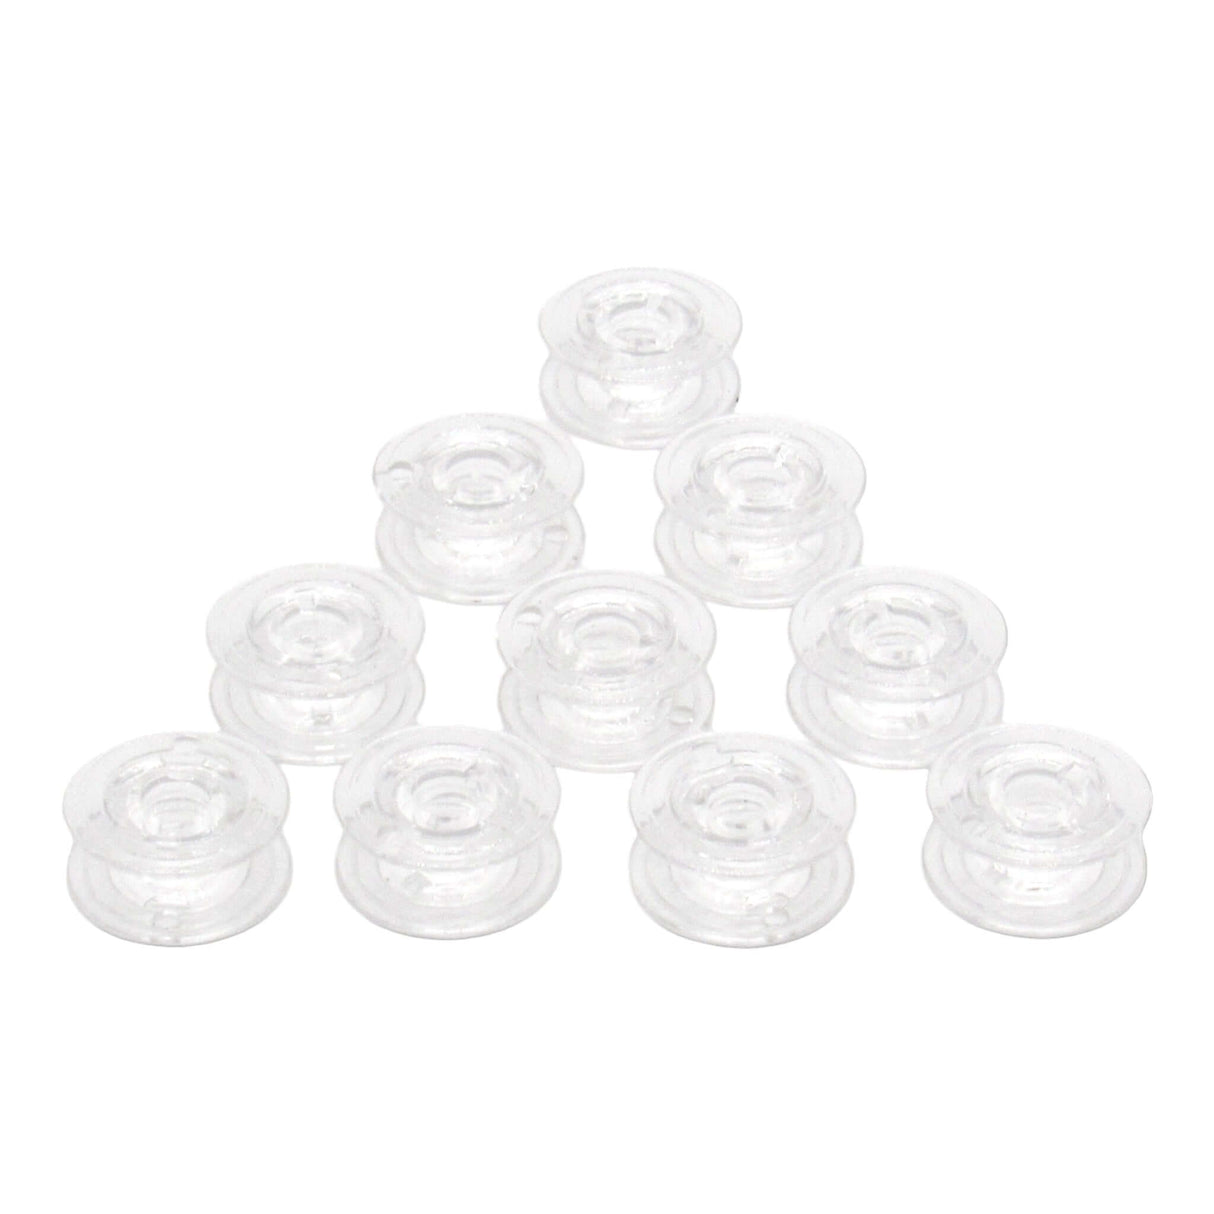 (10) Plastic One Piece Bobbins- Brother Part # 136492-001 - Central Michigan Sewing Supplies